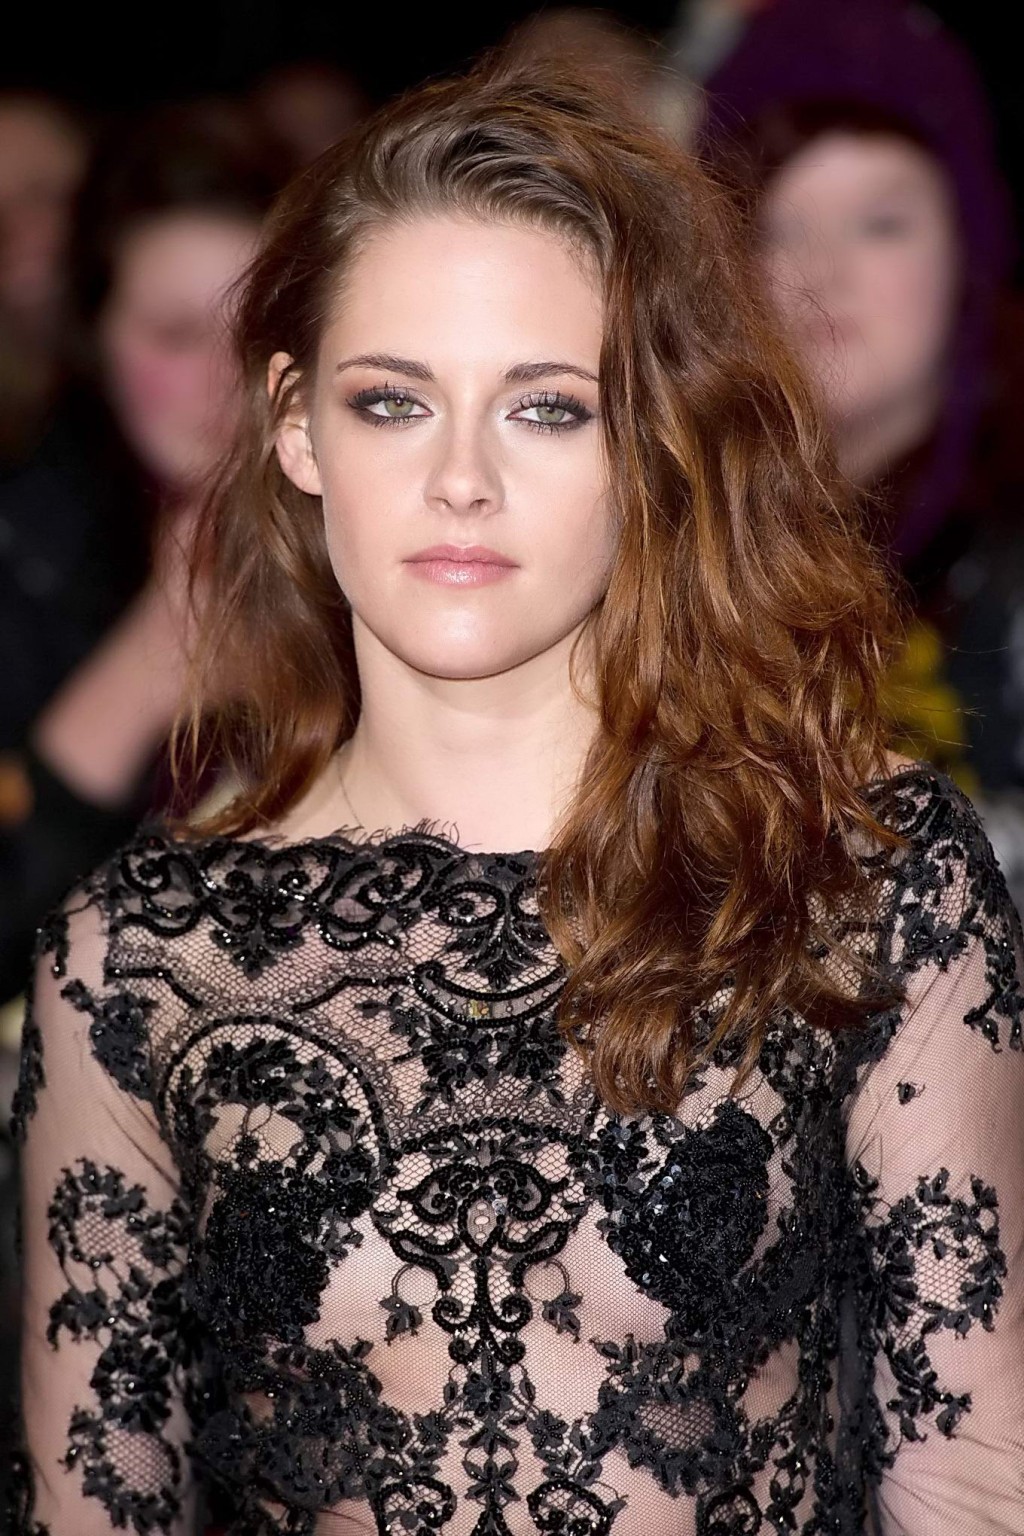 Kristen Stewart bares all in black lace transparent jumpsuit at the London Twili #75248716